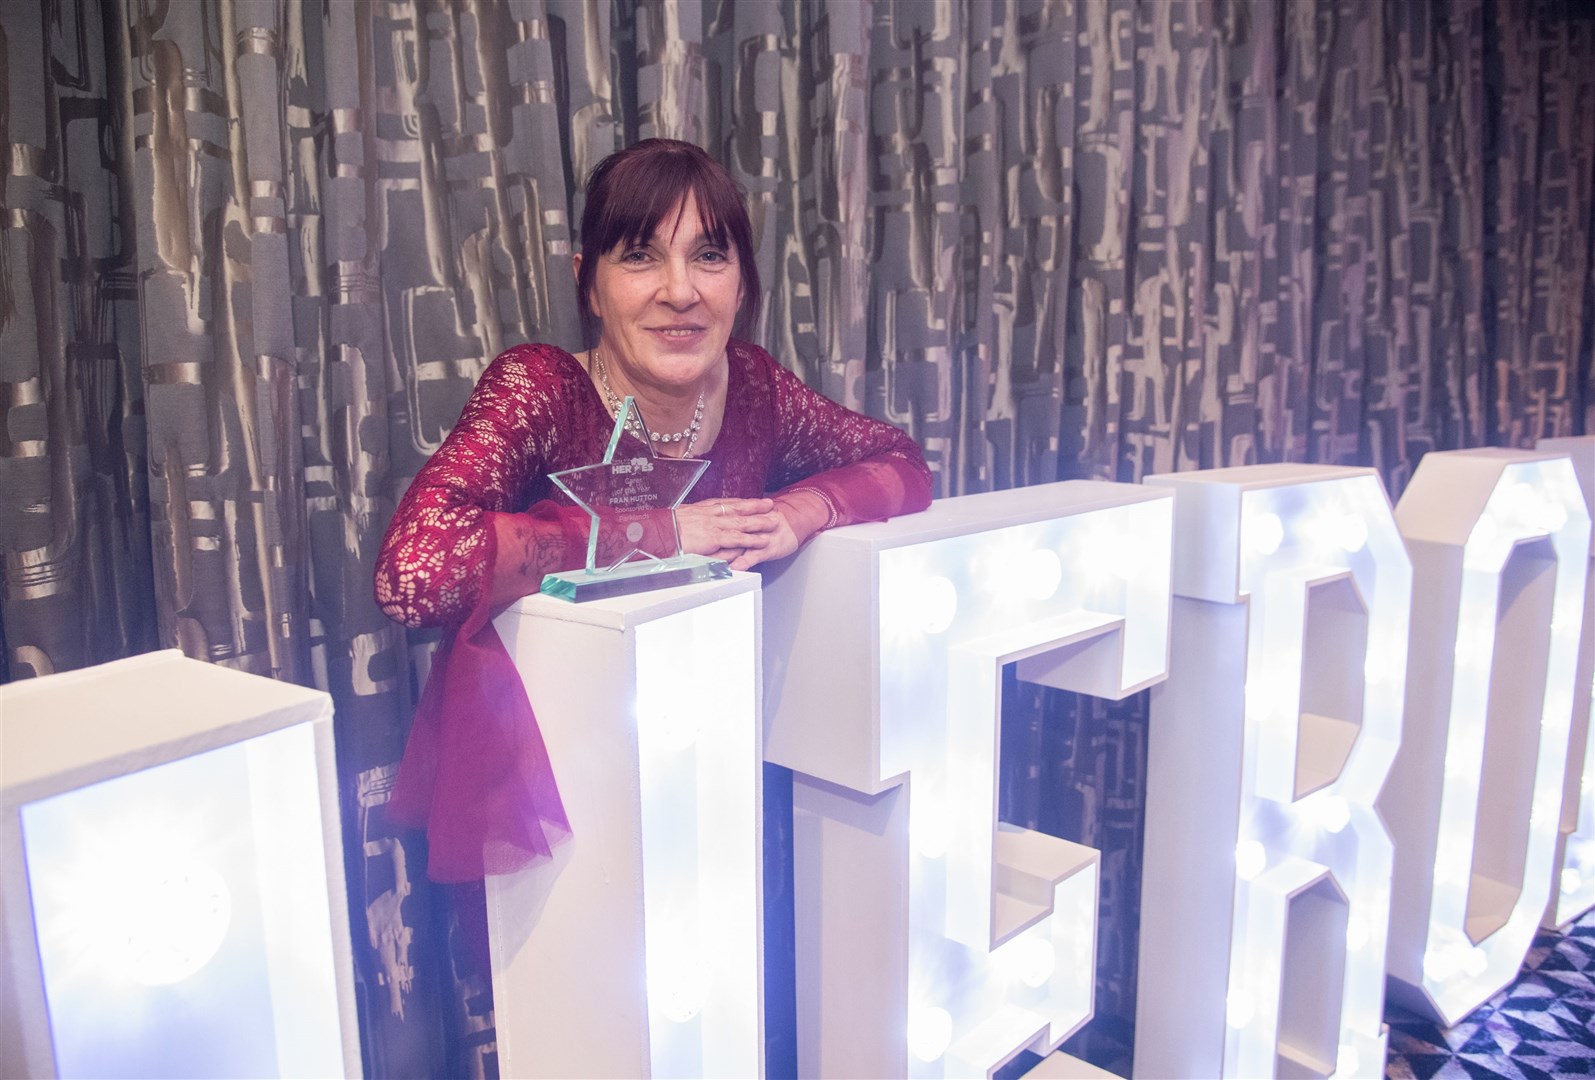 Fran Hutton was named Carer of the Year. Picture: Daniel Forsyth.